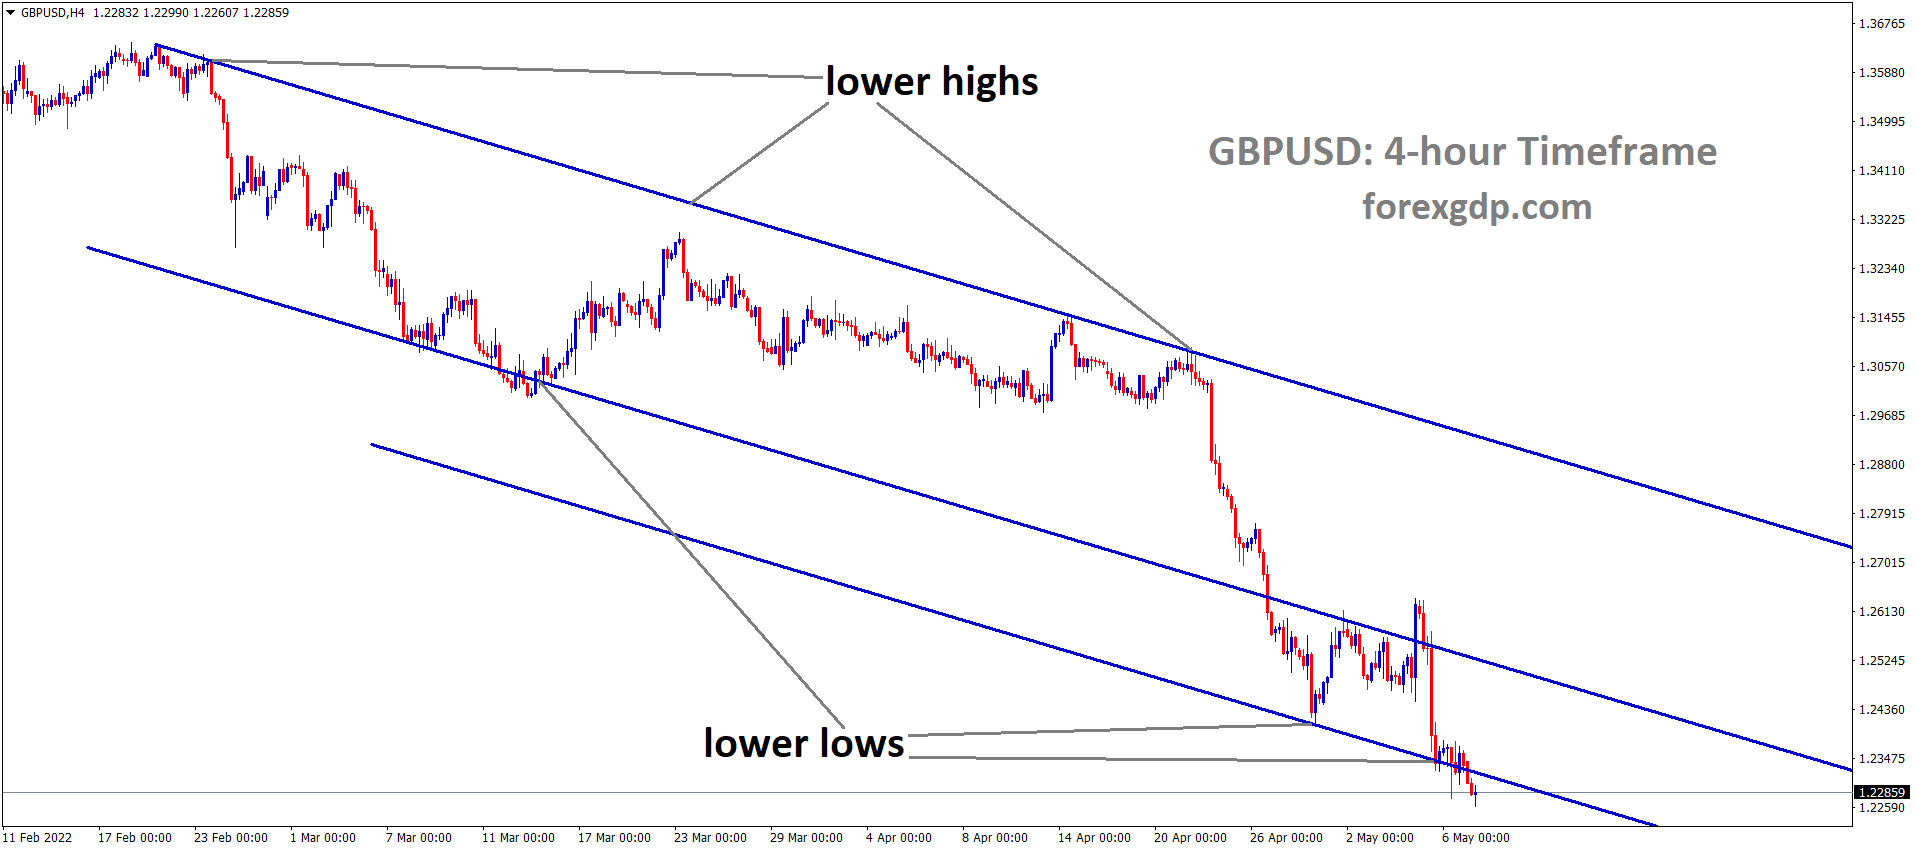 GBPUSD H4 Time Frame Analysis Market is moving in the Descending channel and the Market has reached the Lower low area of the Channel